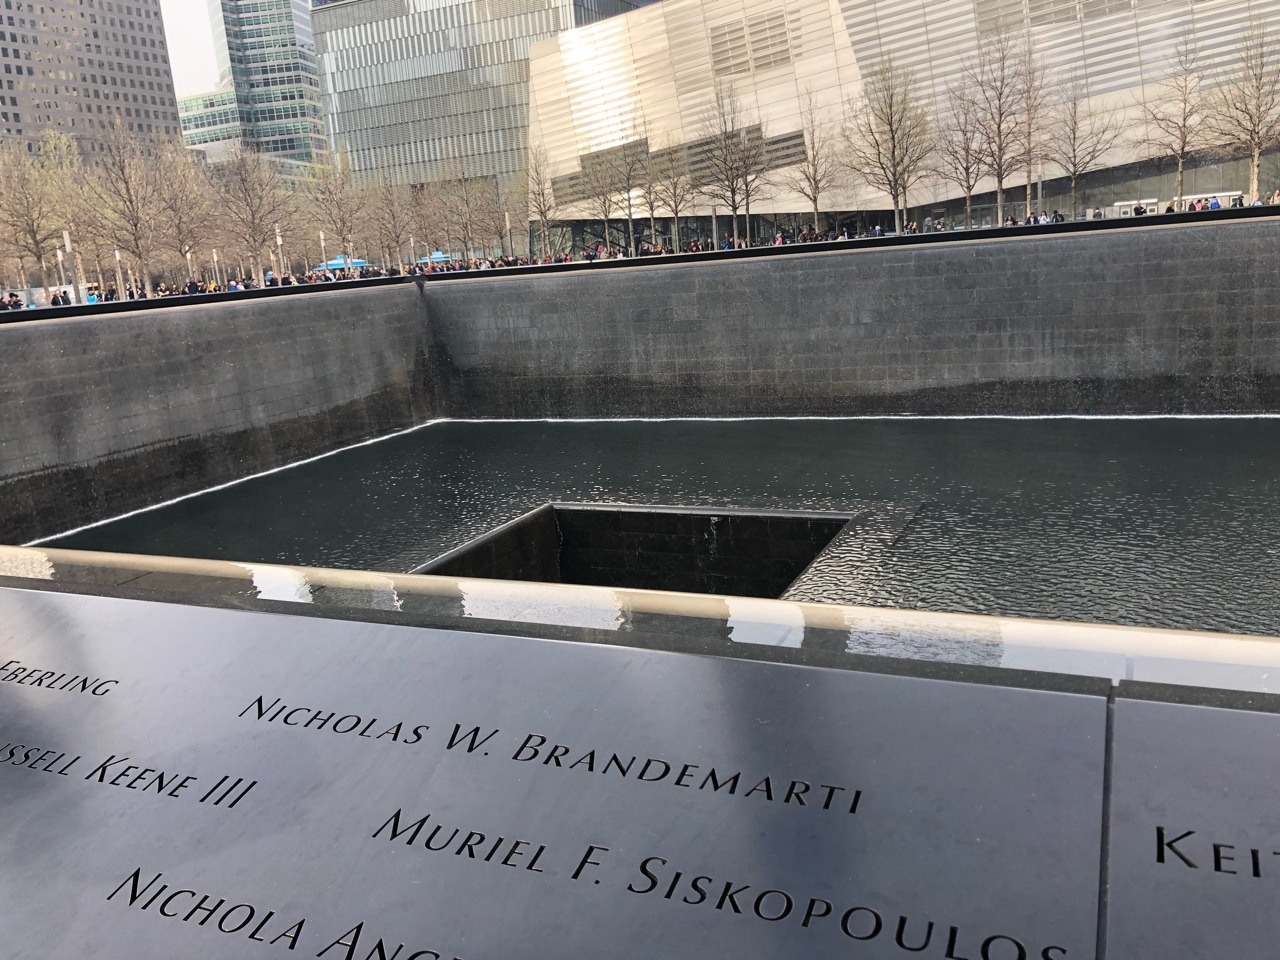 9/11 Memorial part 1/3Y’all I cannot emphasize enough how humbling this was!! Such a somber and incredible museum . Such a horrible event but a wonderful museum to honor the fallen and what happened.. I walked around choked up for well over an hour